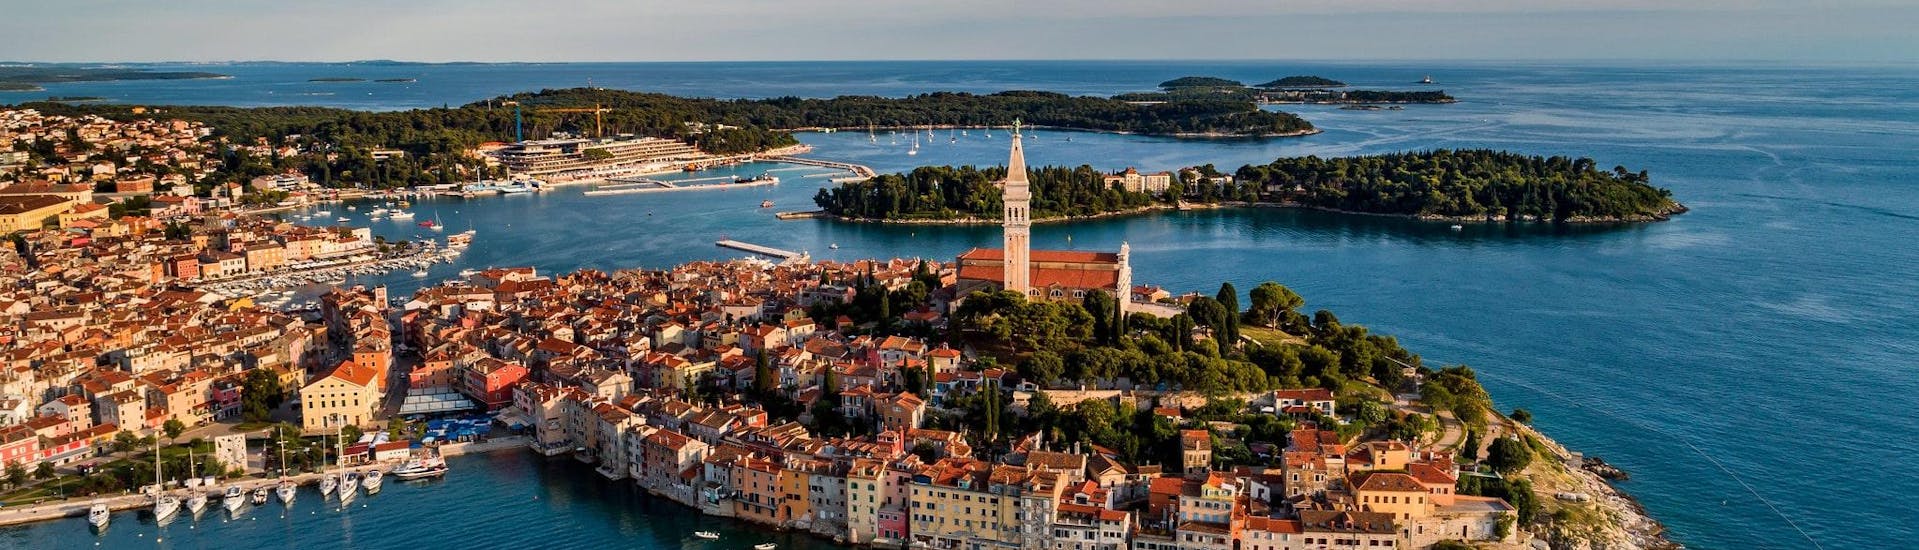 View of the picturesque city of Rovinj, which is a popular destination for boat trips in Istria.